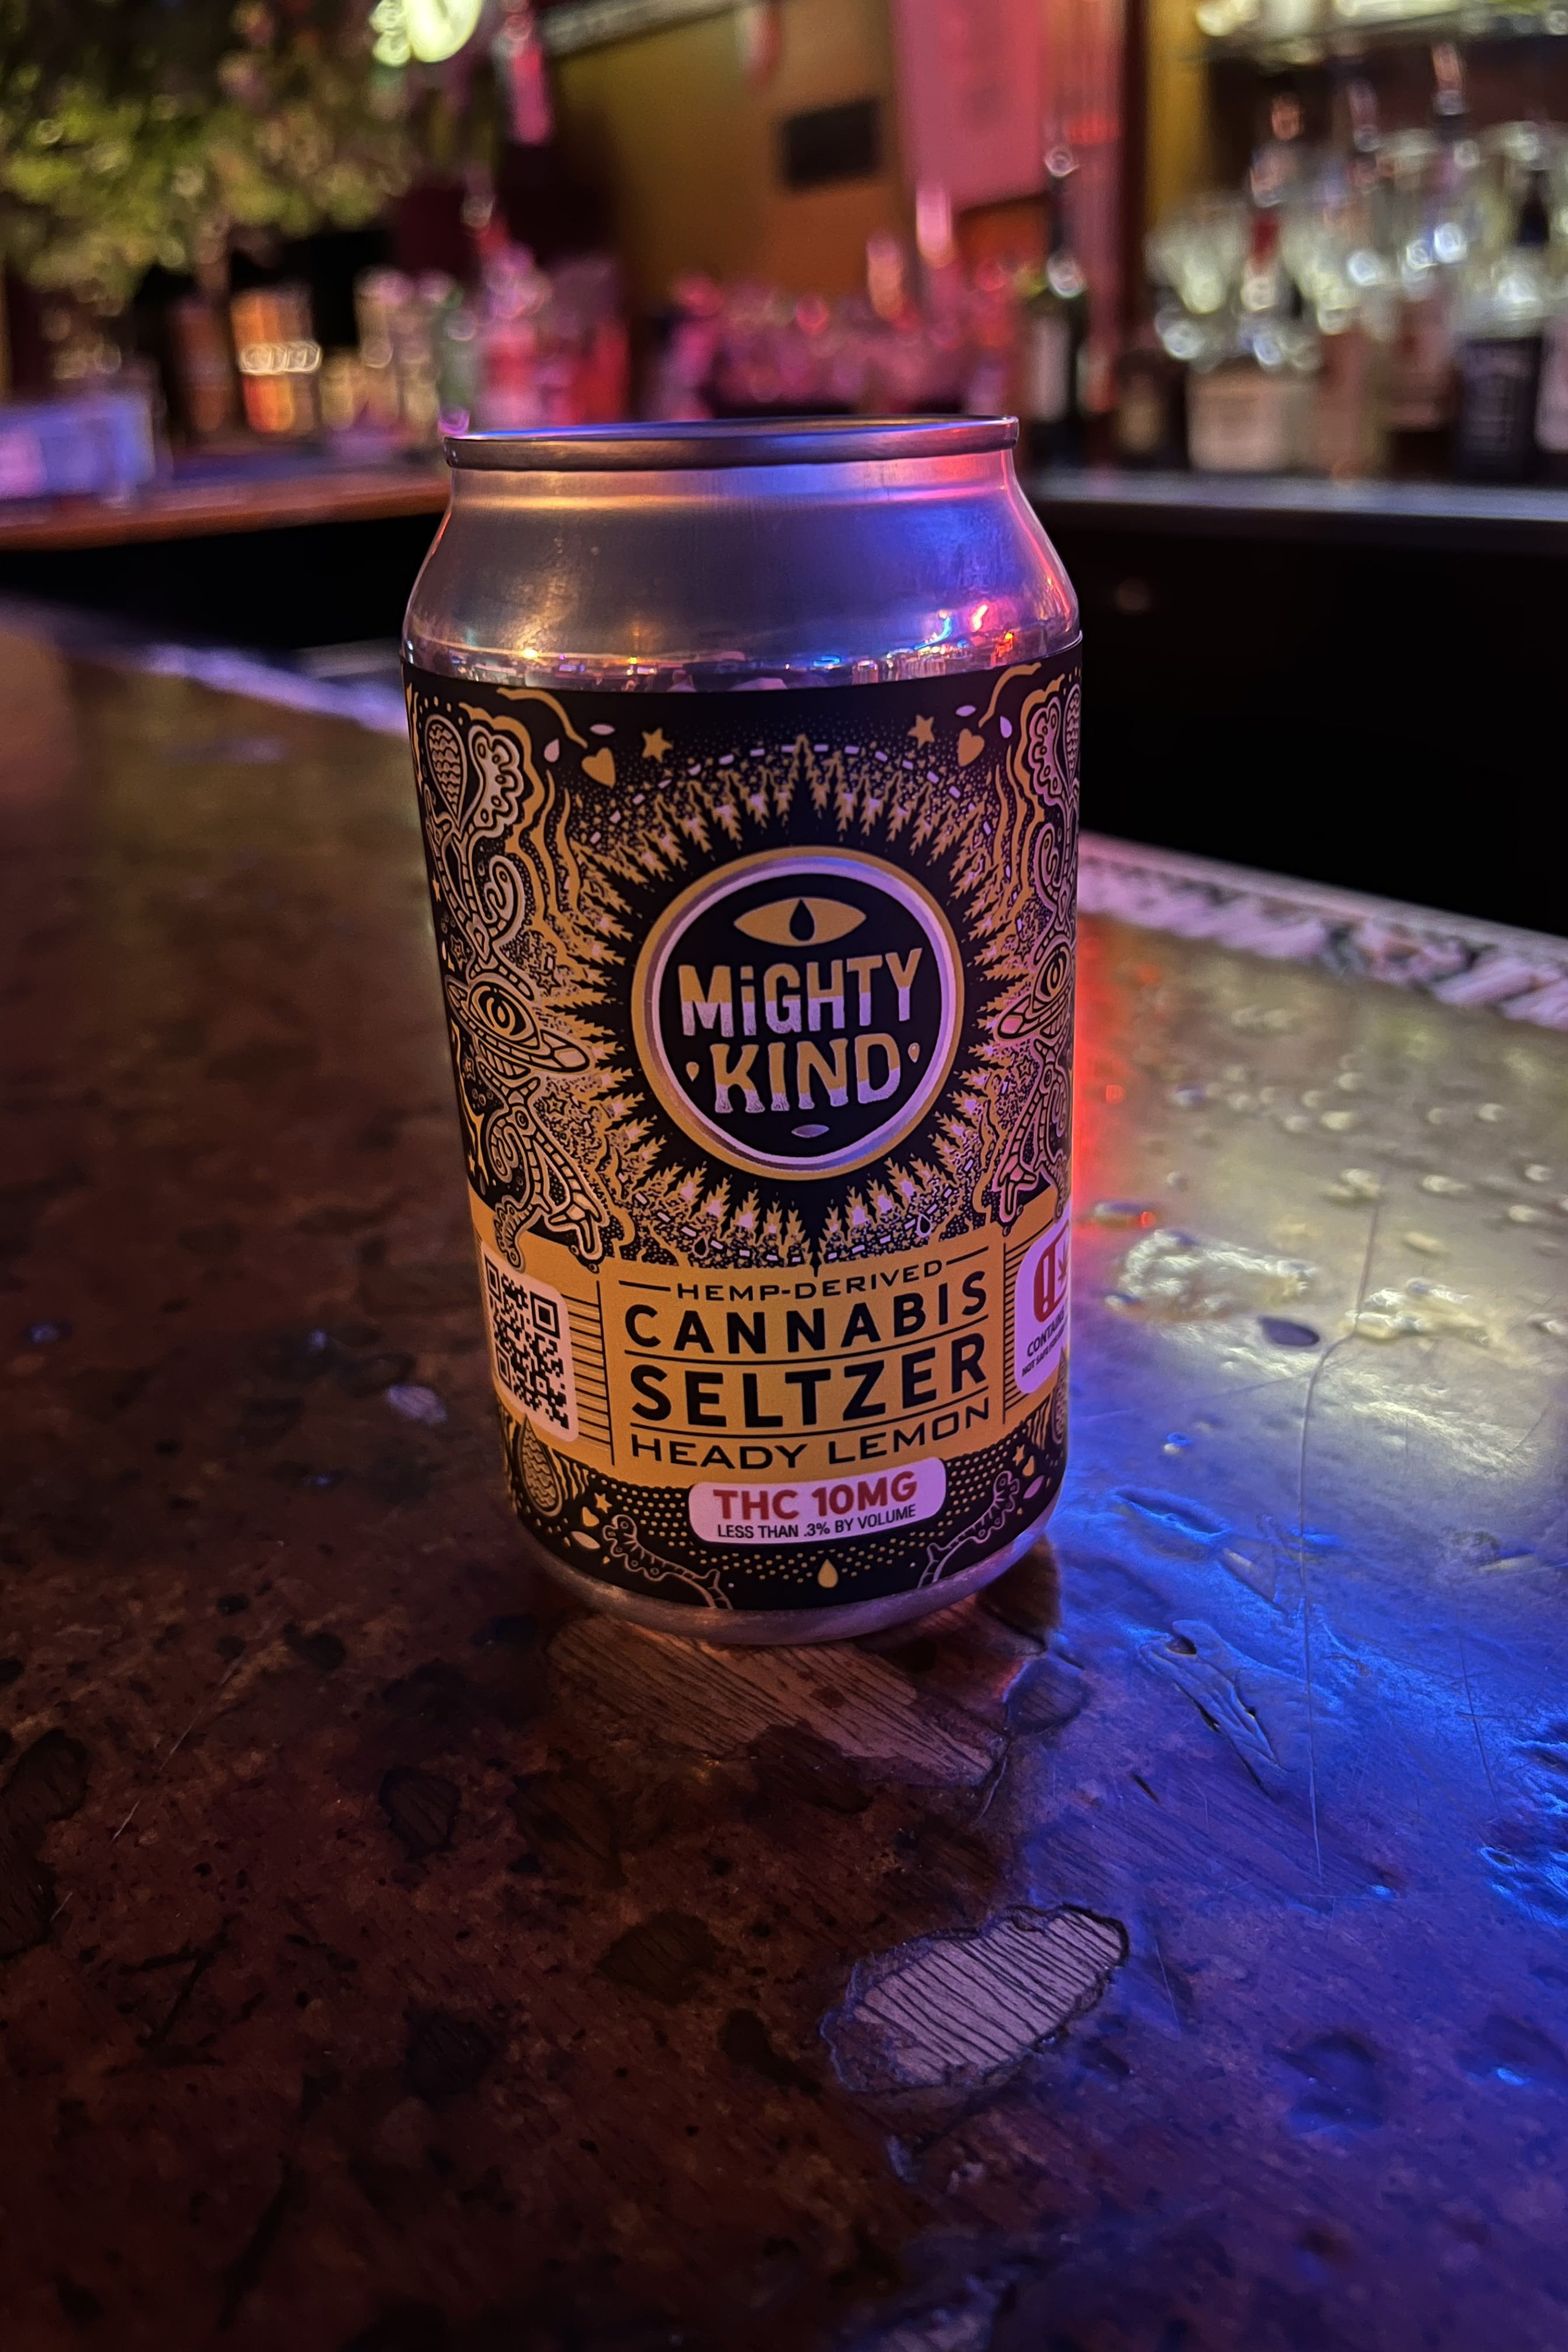 A can of "Mighty Kind Cannabis Seltzer." A bold design with a yellow label.